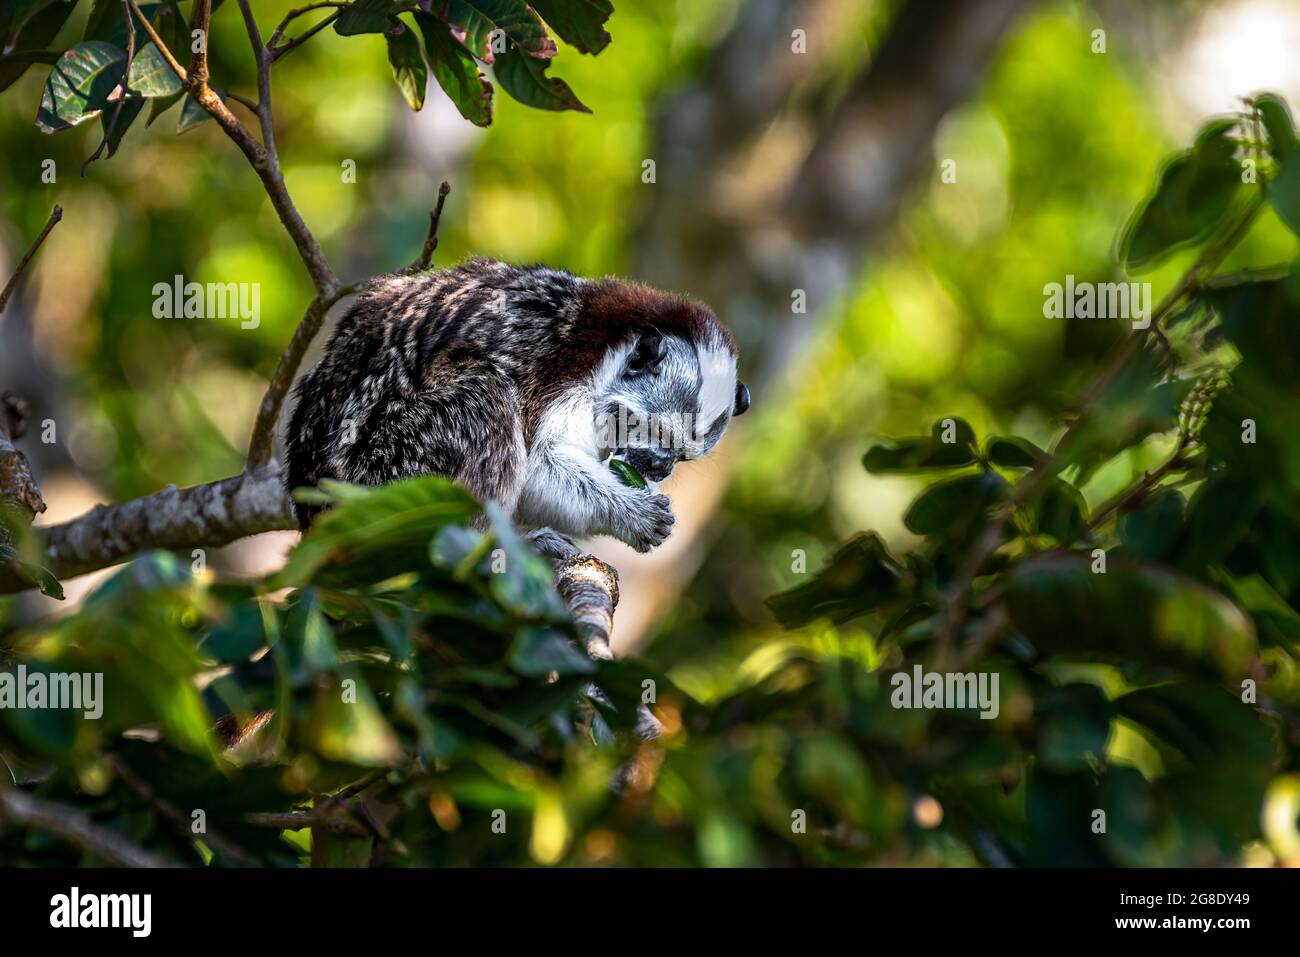 Tamarin Eating High Resolution Stock Photography and Images - Alamy